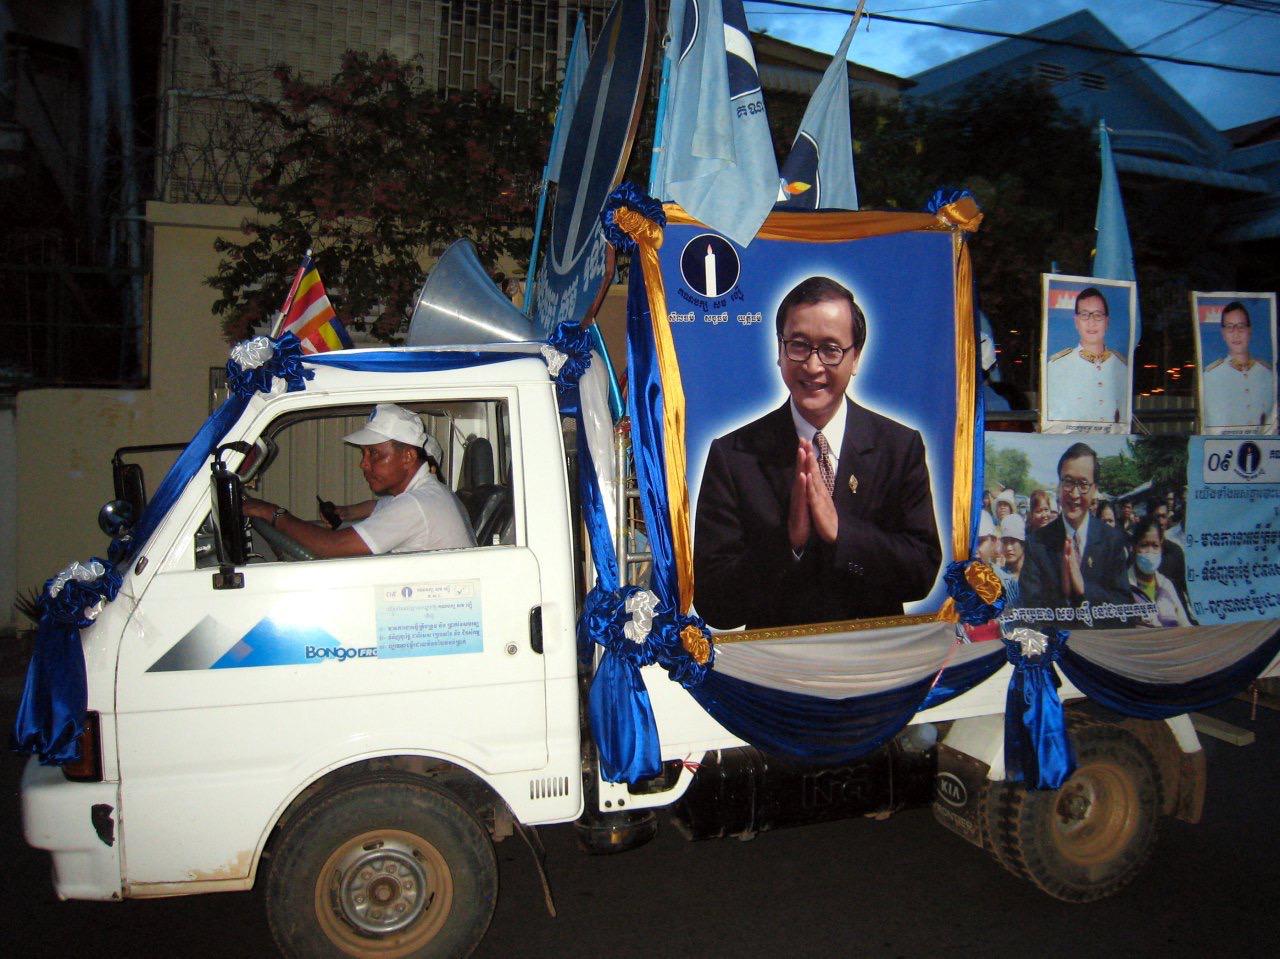 Sam Rainsy and the Candlelight Party